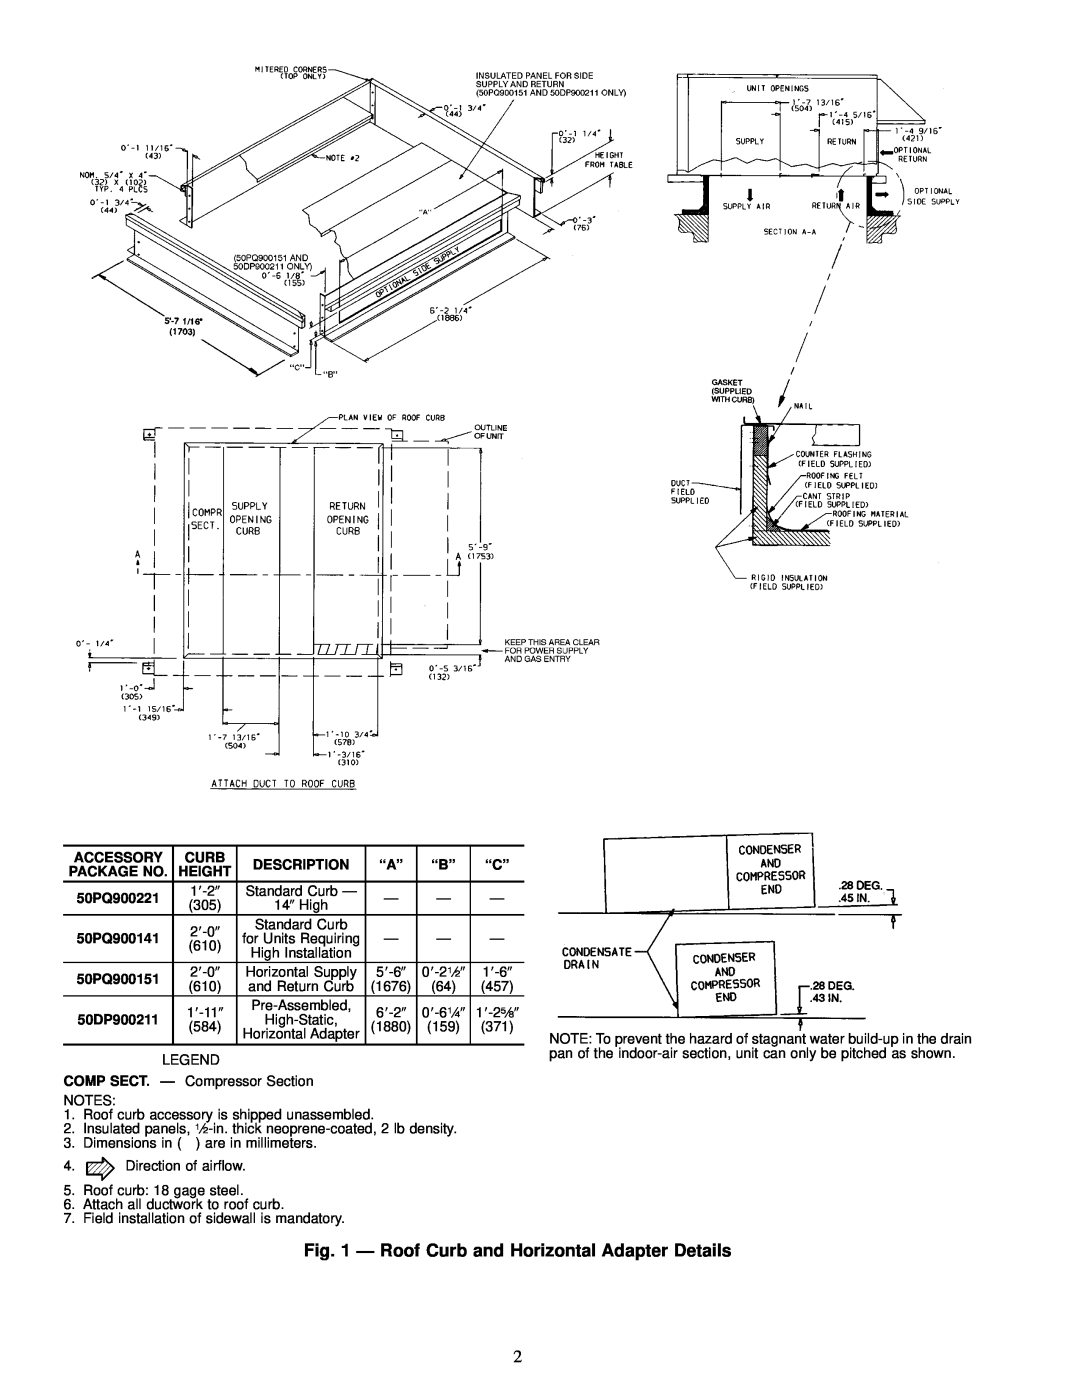 Carrier 48HJ015-025 Ð Roof Curb and Horizontal Adapter Details, Accessory, Description, Package No, Height, 50DP900211 